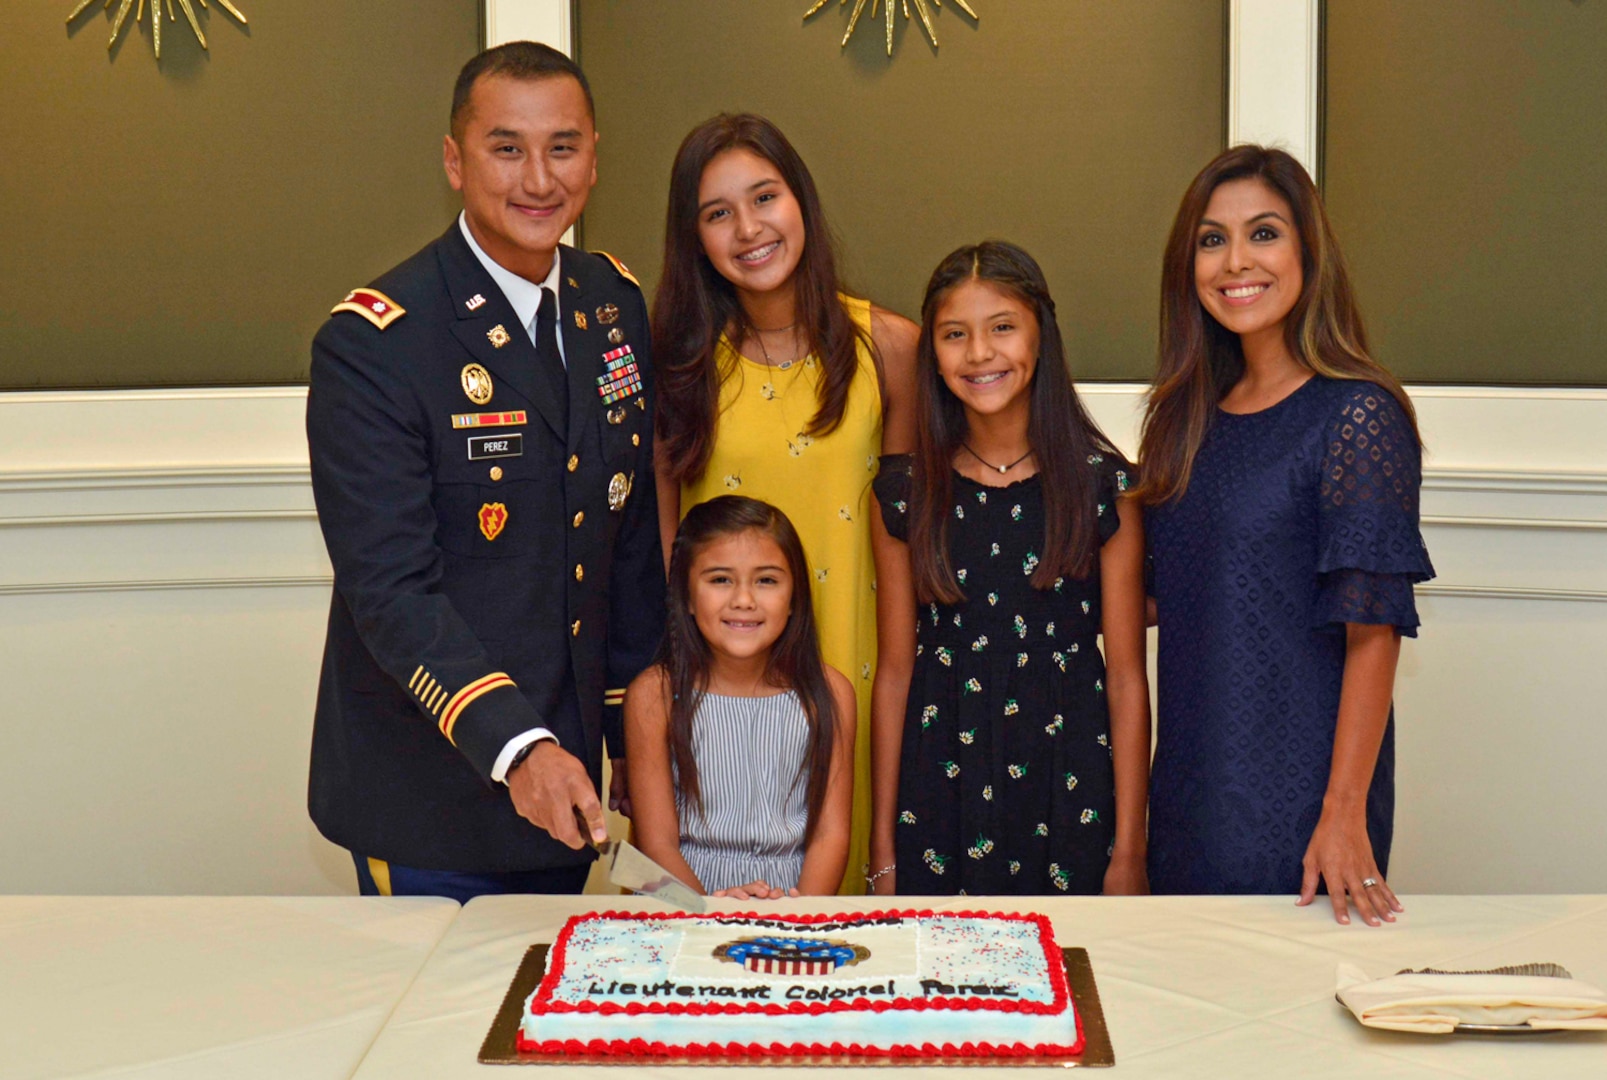 Lt. Col. Julian Perez and his family prepare to cut the cake